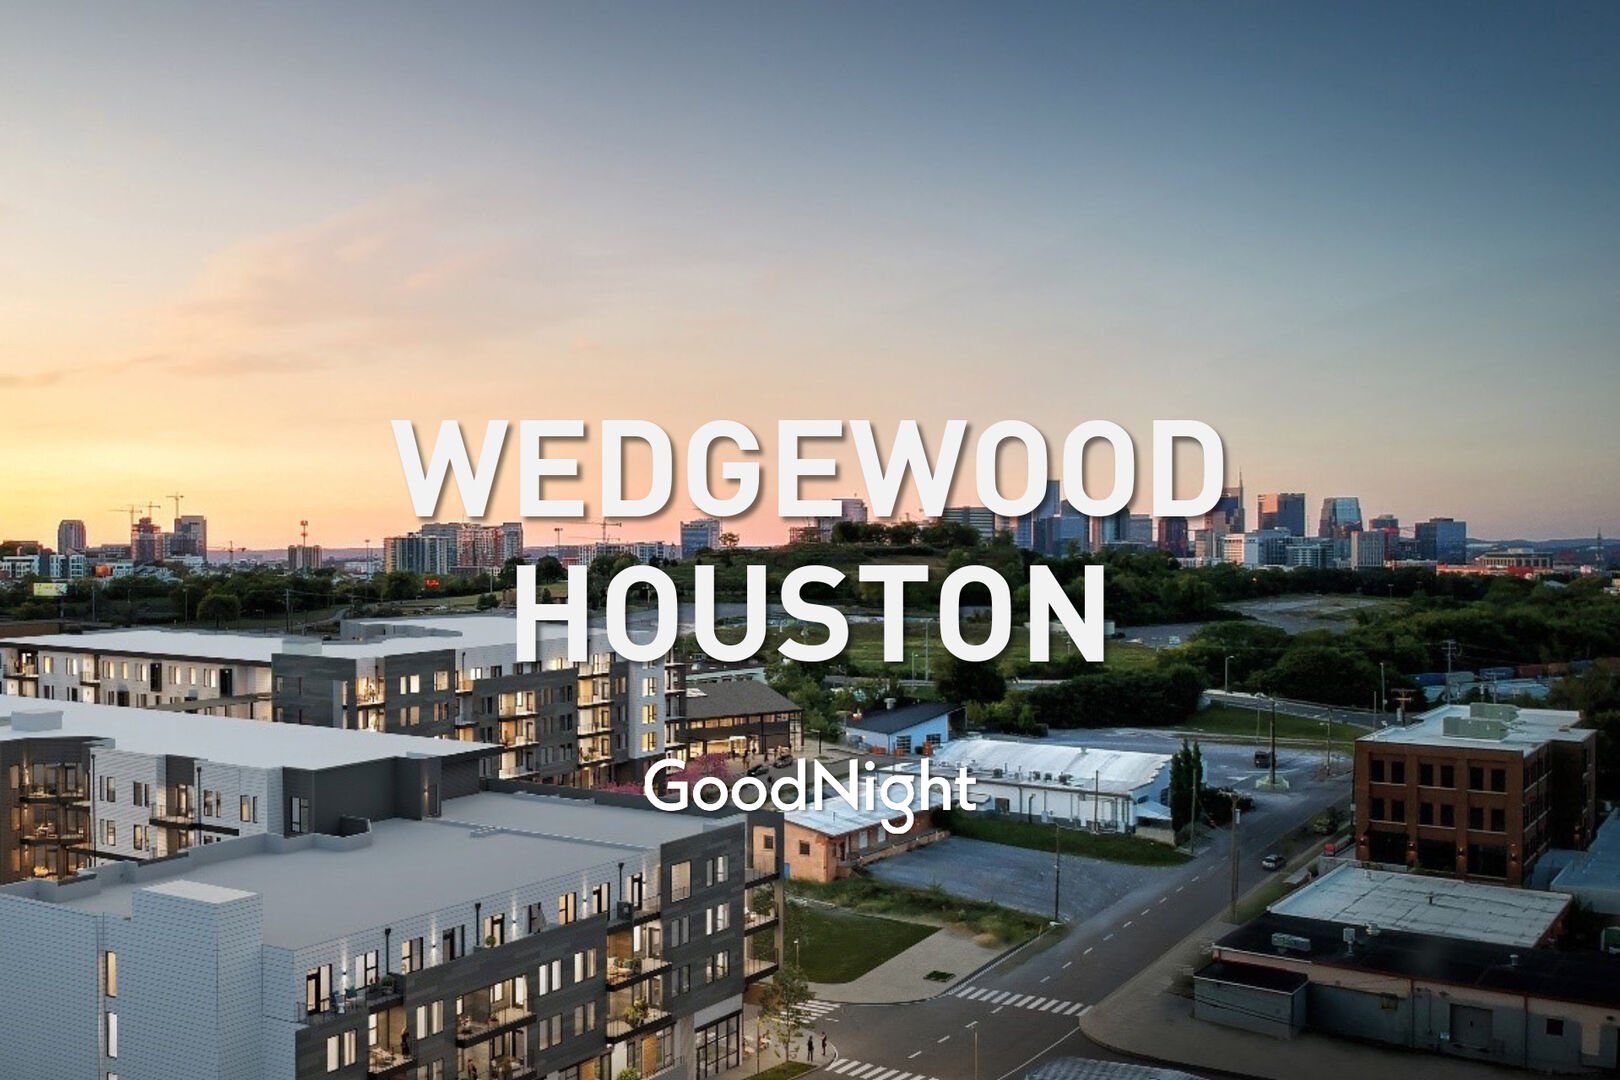 Located in the upcoming artist filled neighborhood of Wedgewood-Houston!